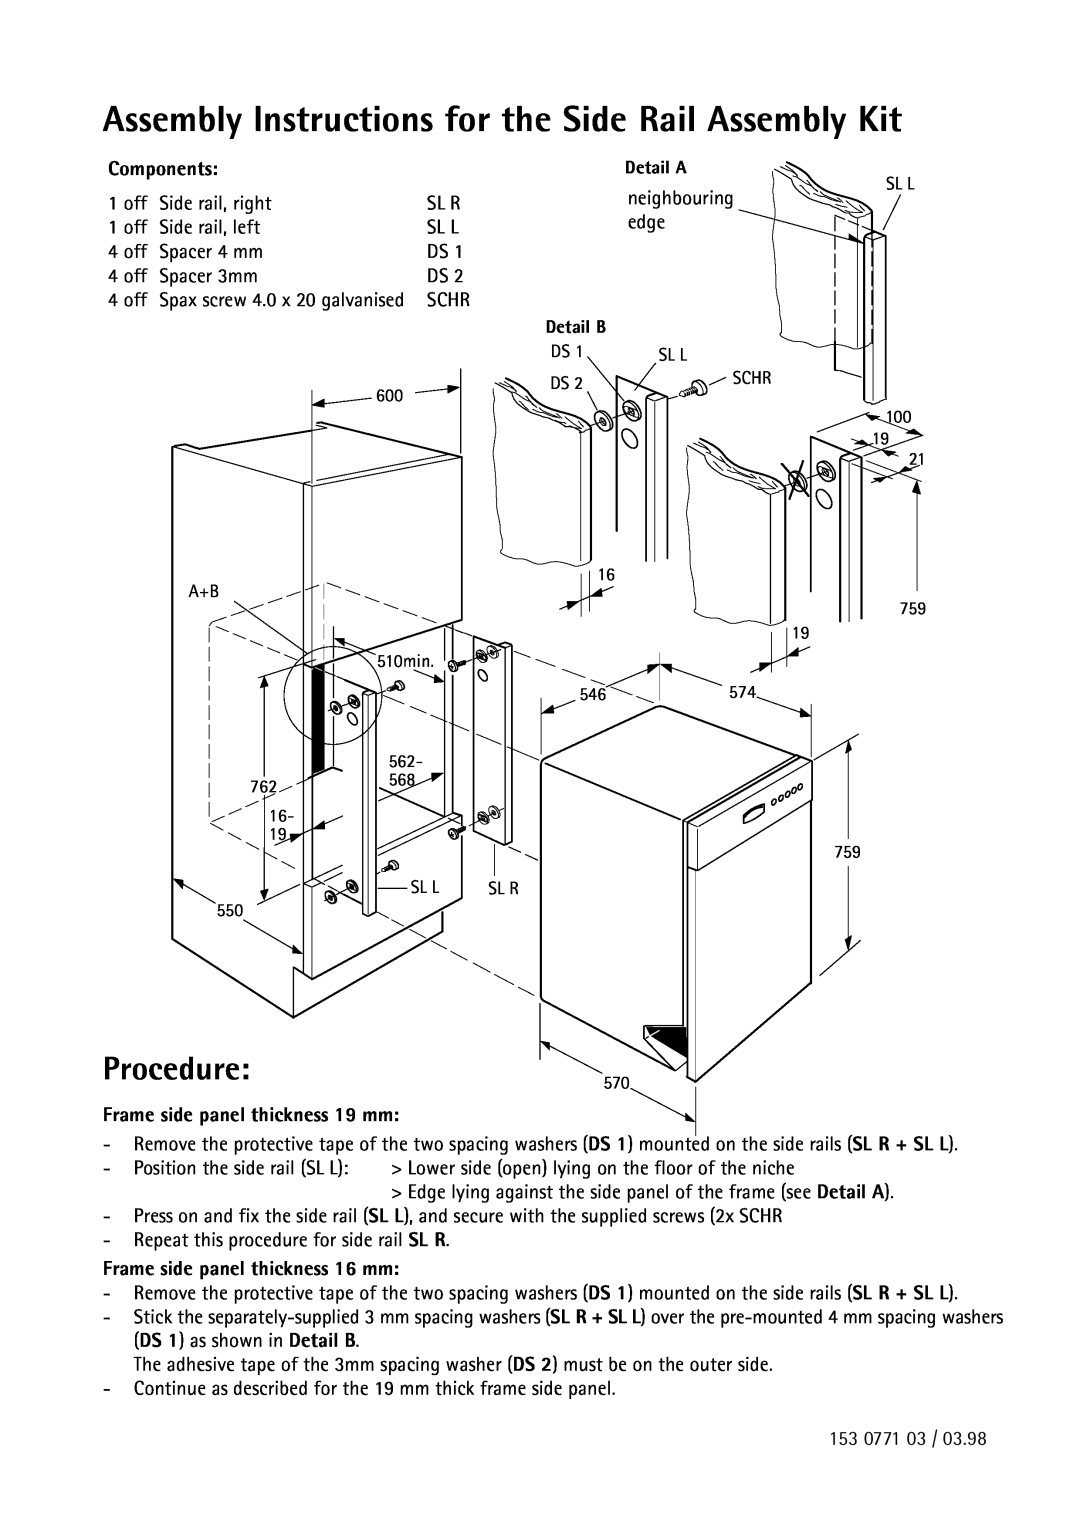 Electrolux 55750 manual Assembly Instructions for the Side Rail Assembly Kit, Procedure570 